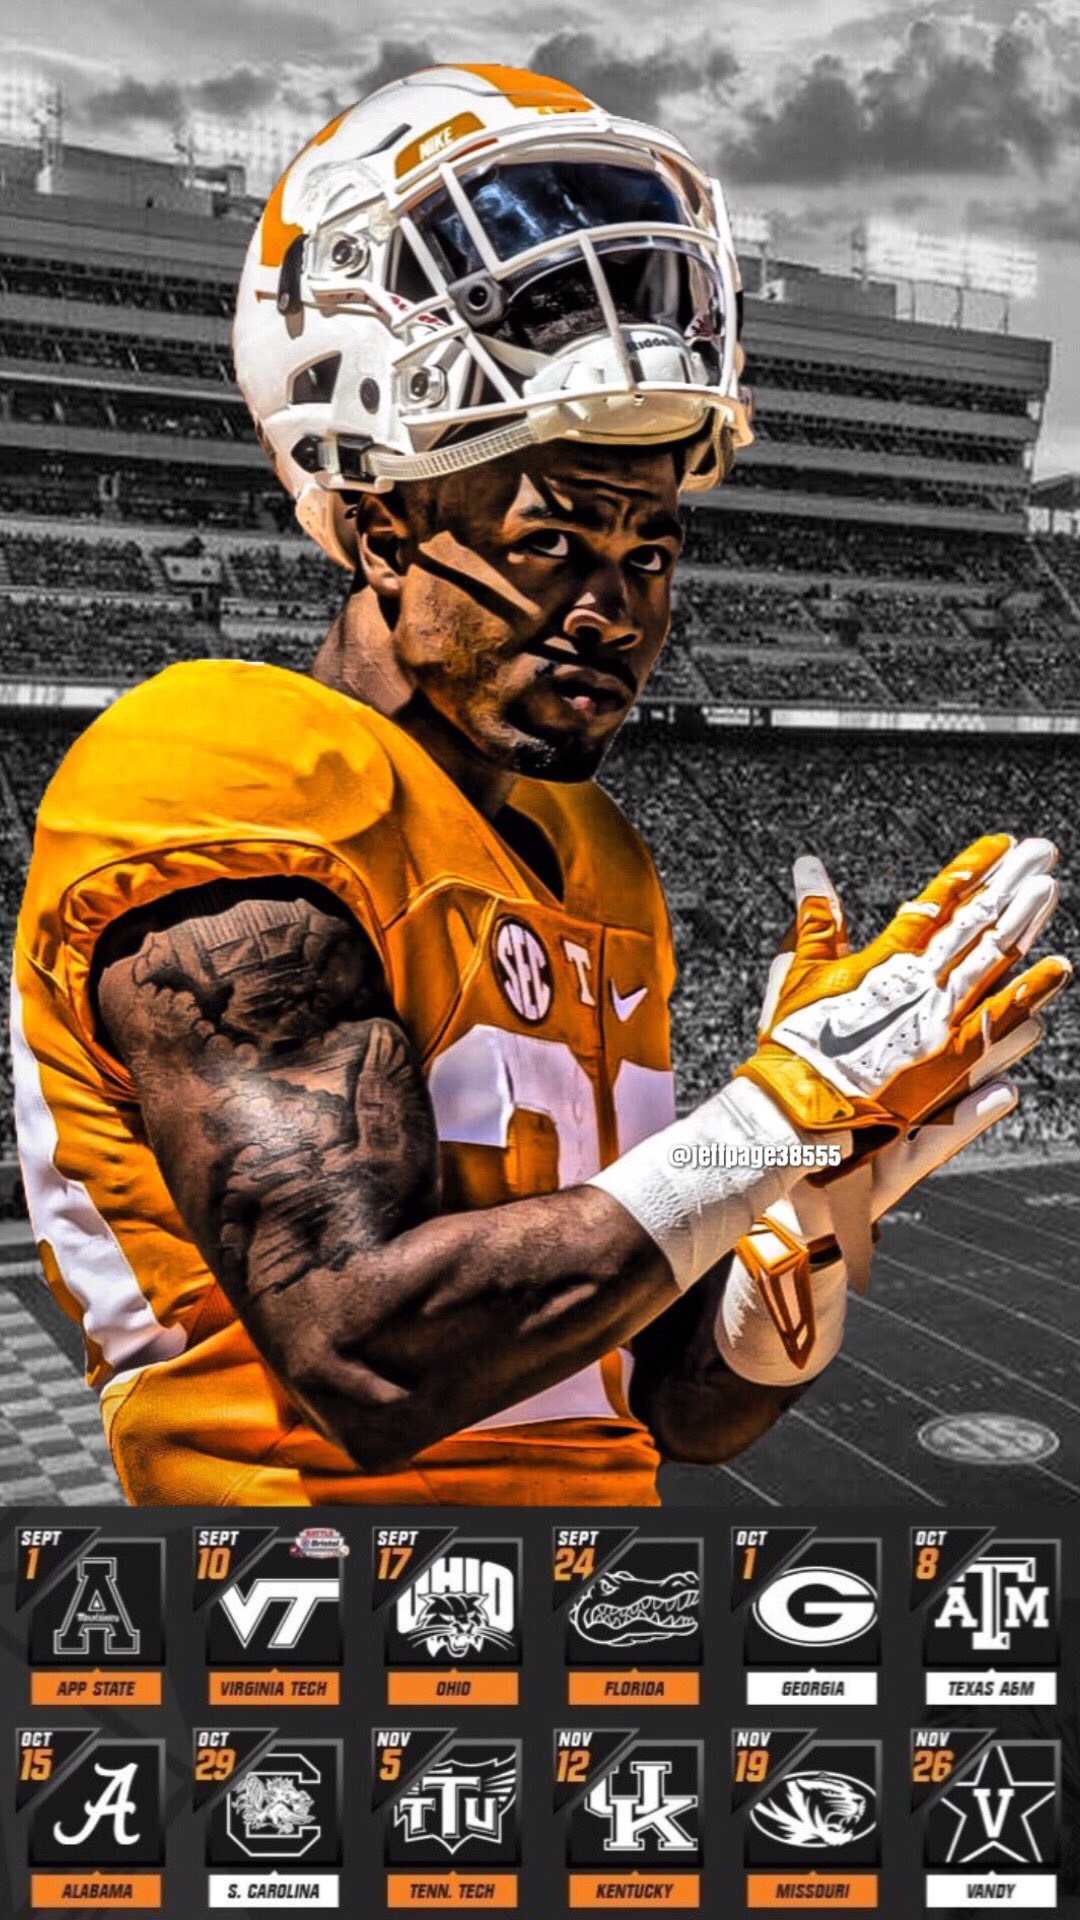 Jeff Page On Twitter Quot Cam Sutton 2022 Vols Football Schedule Wallpaper Sized For Iphone 6 Use Amp Rt If You Like Https T Co Ug3yjw8gvo Quot 1080x1920